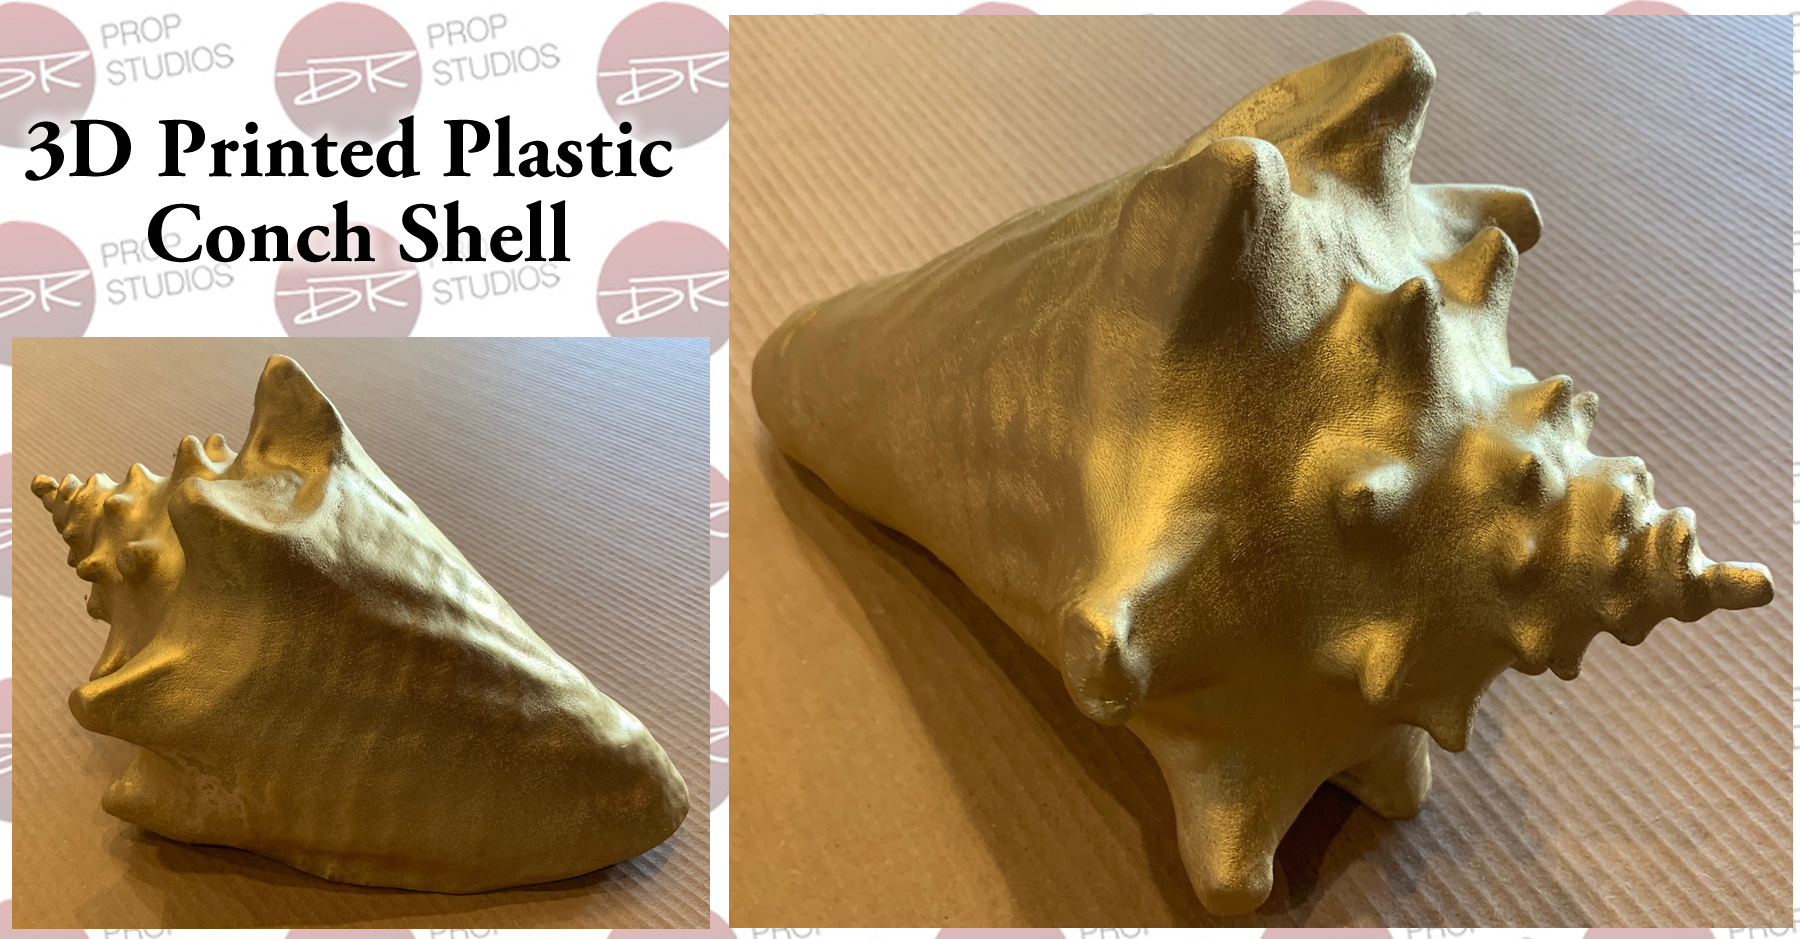 Conch Shell 3D Printed Plastic Prop